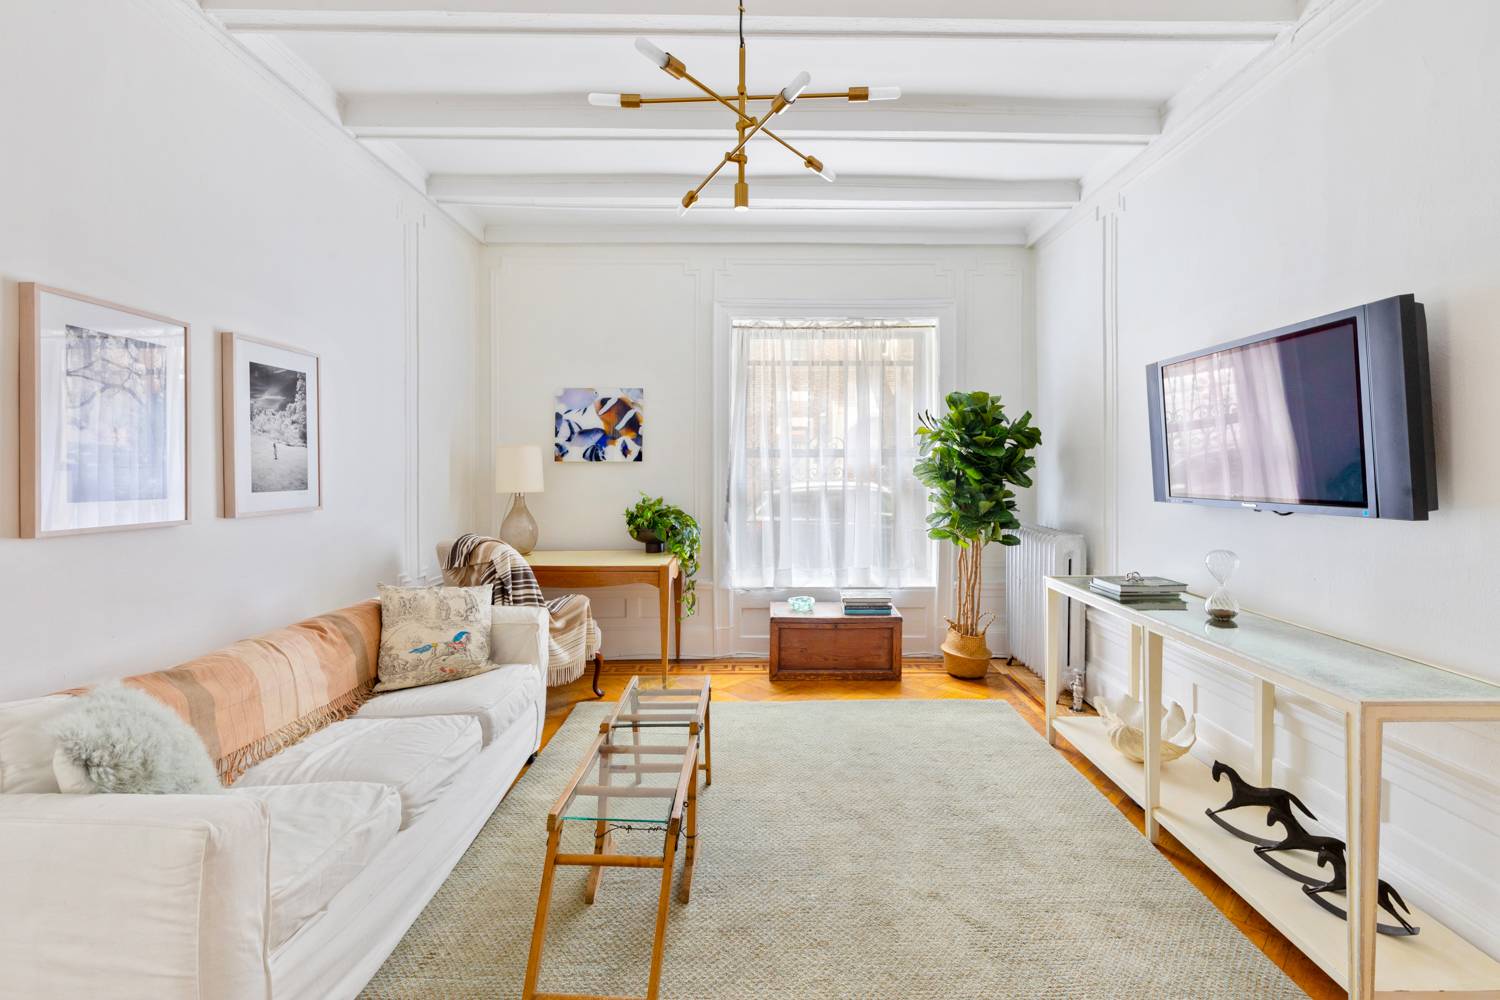 Set in a prime Brooklyn Heights location directly across from the Promenade, the beautiful Beaux Arts lobby welcomes you into this exquisitely designed and well appointed 3 Bedroom, 1 Full ...